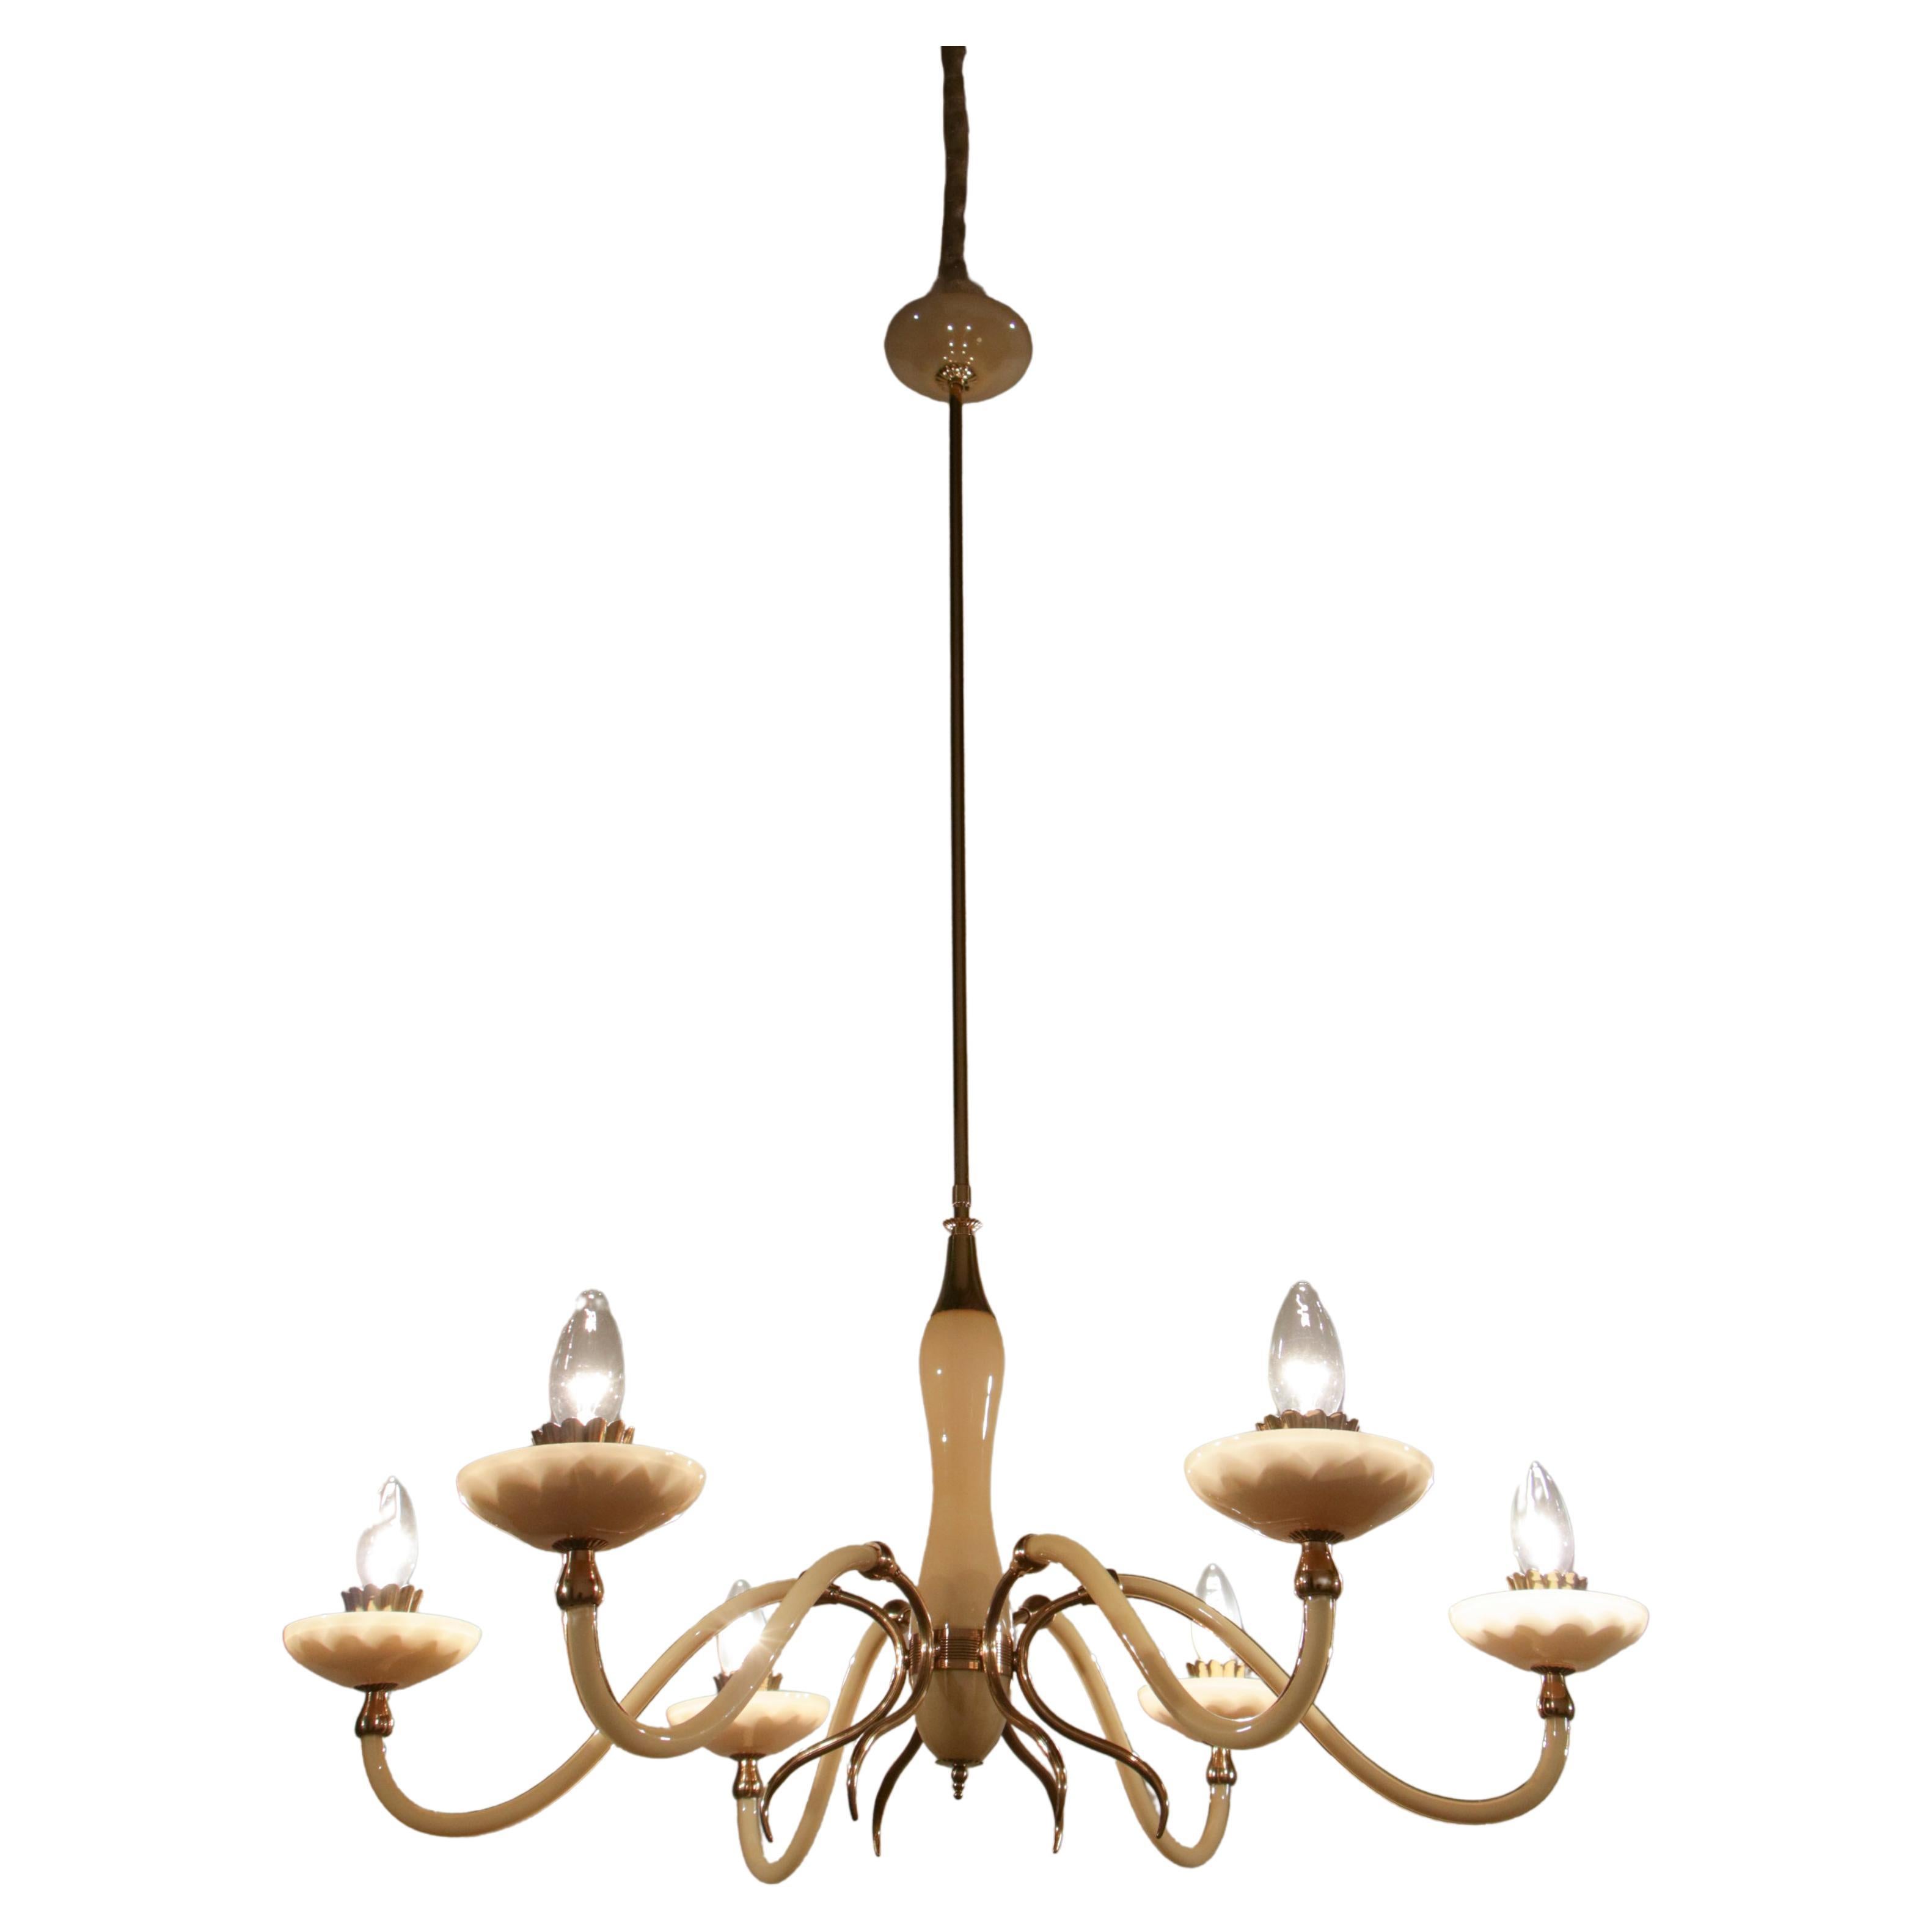 Elegant Italian Mid-Century Modern, honey color, with six light in E14 format chandelier, from the 1950s.
The chandelier is made of honey color Murano glass and polished brass. The refined design has great executive quality as brass lamp holders.